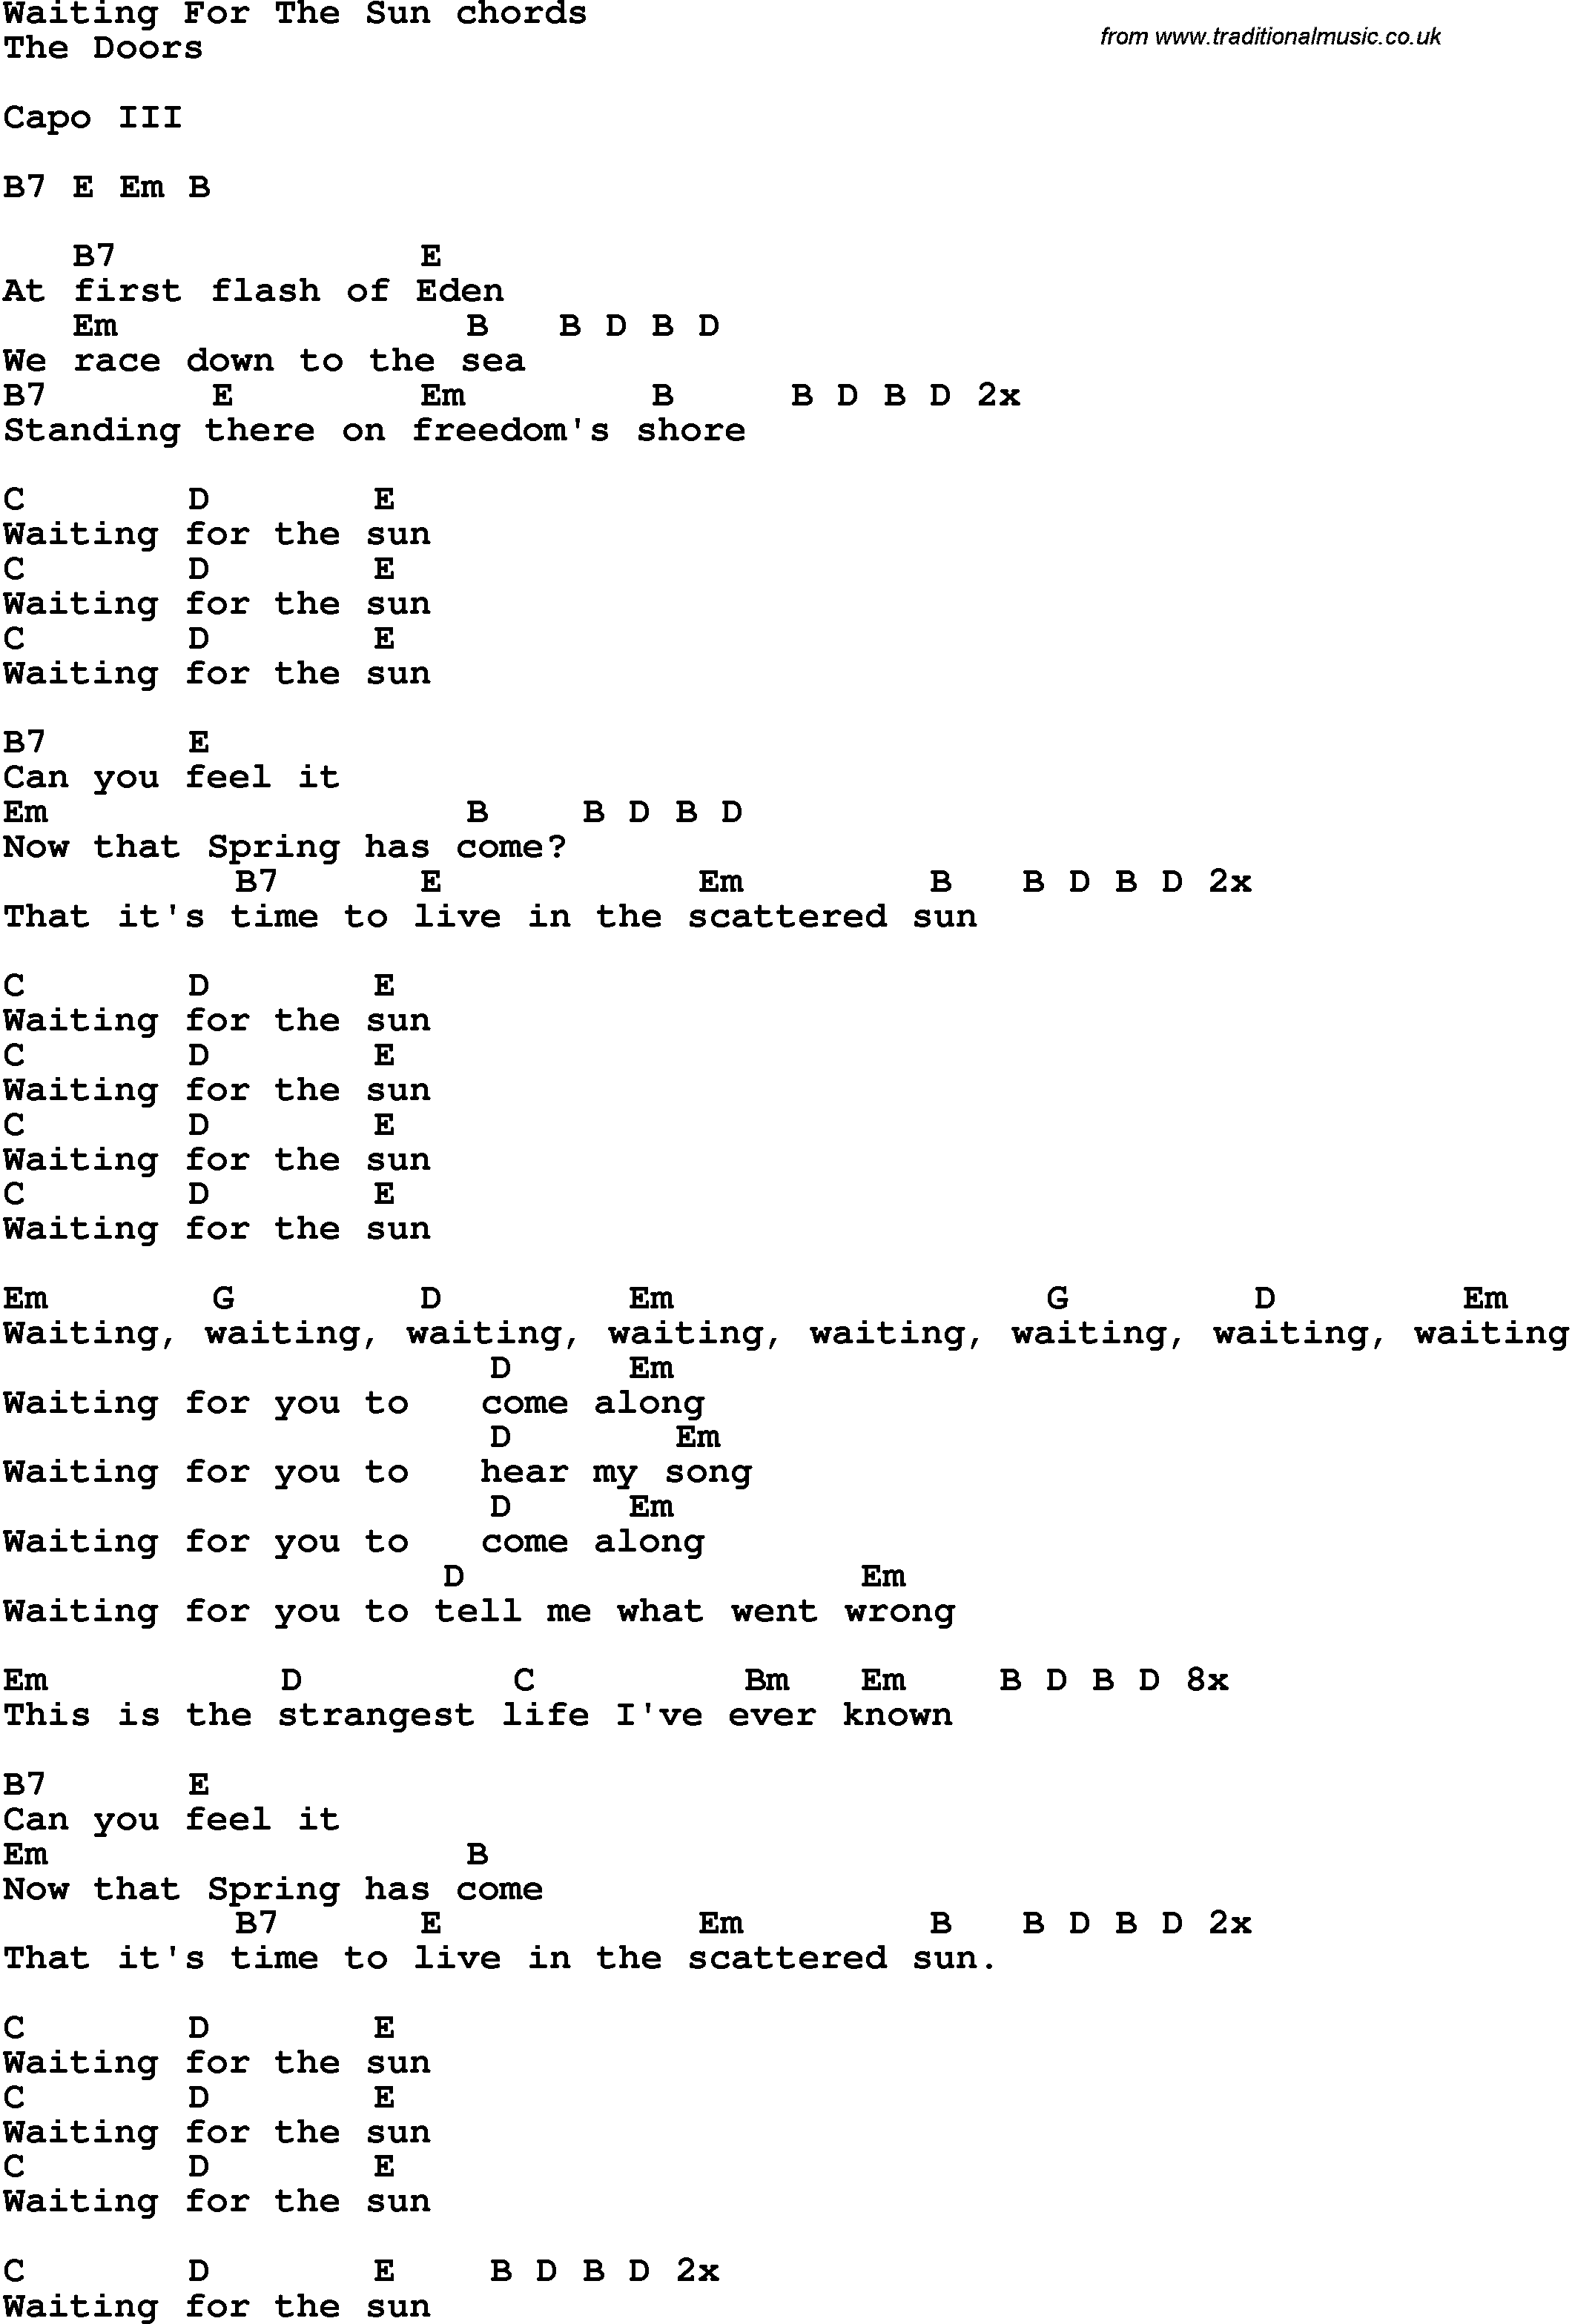 Song Lyrics with guitar chords for Waiting For The Sun